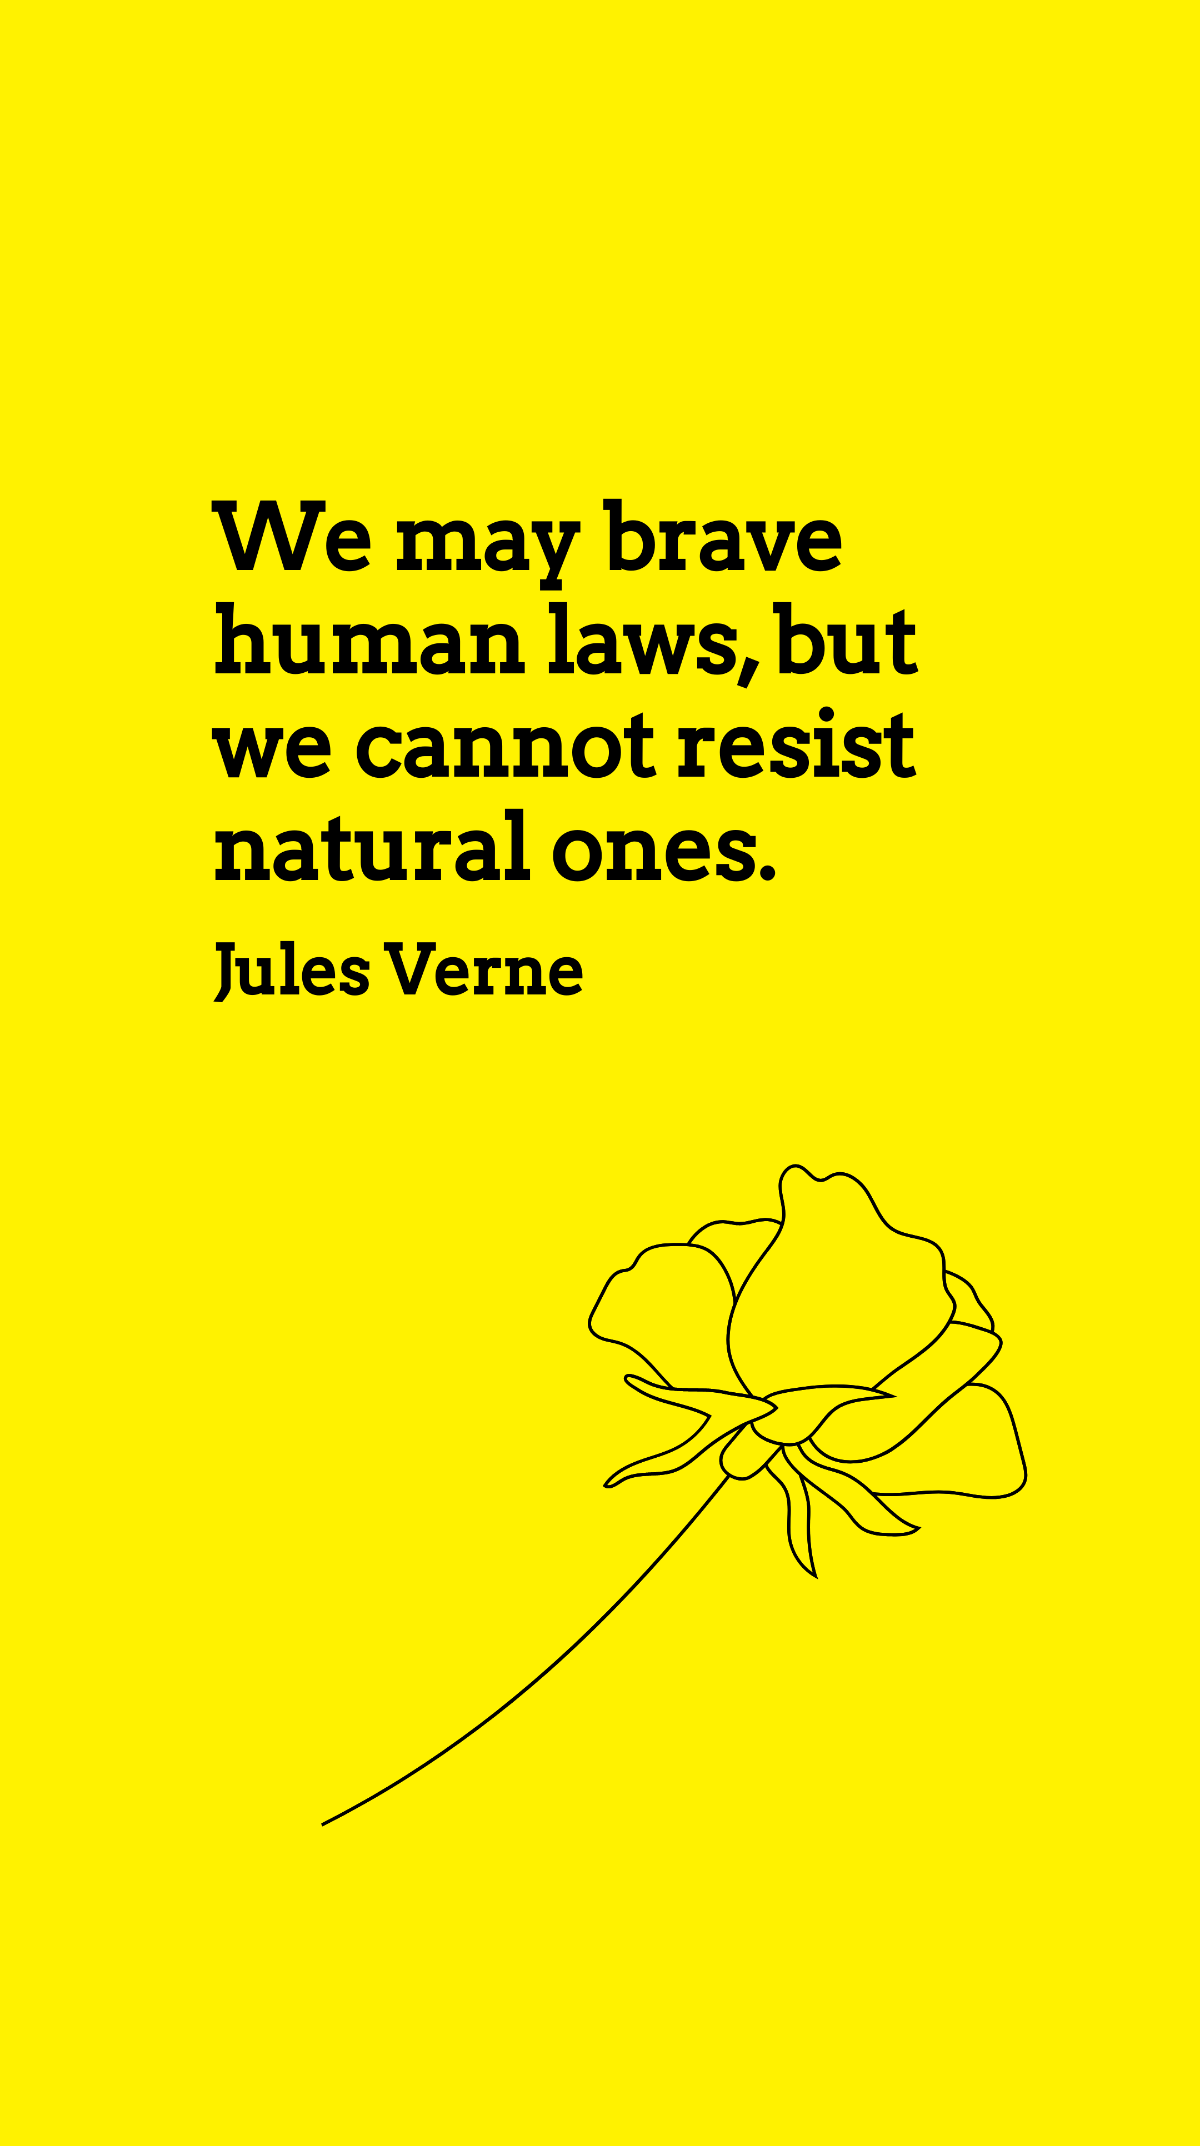 Jules Verne - We may brave human laws, but we cannot resist natural ones.